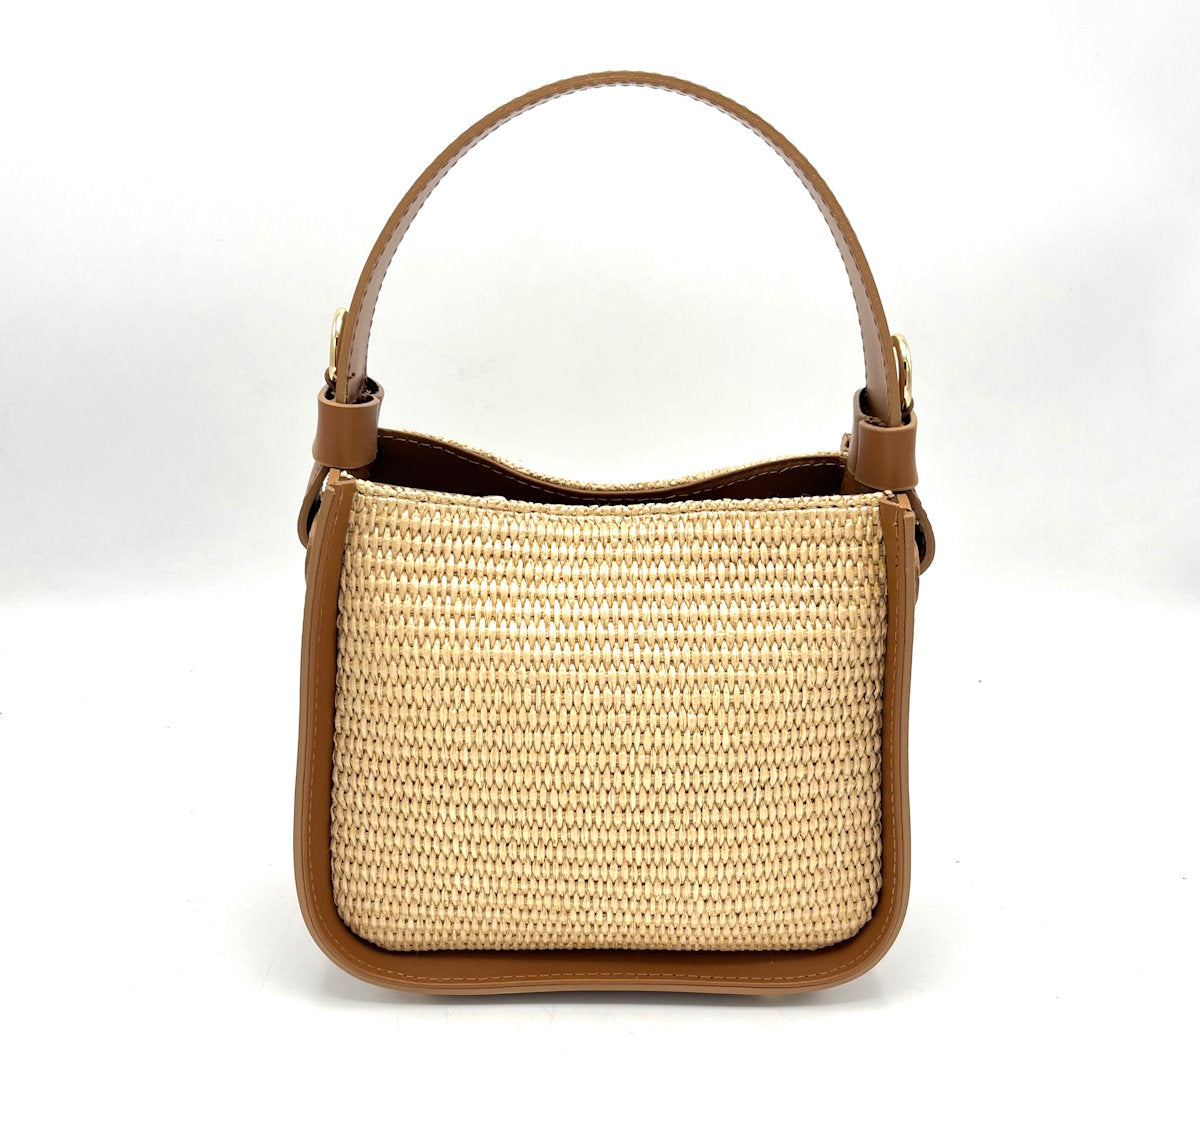 Genuine leather shoulder and straw bag, made in Italy, small size, art. 112447